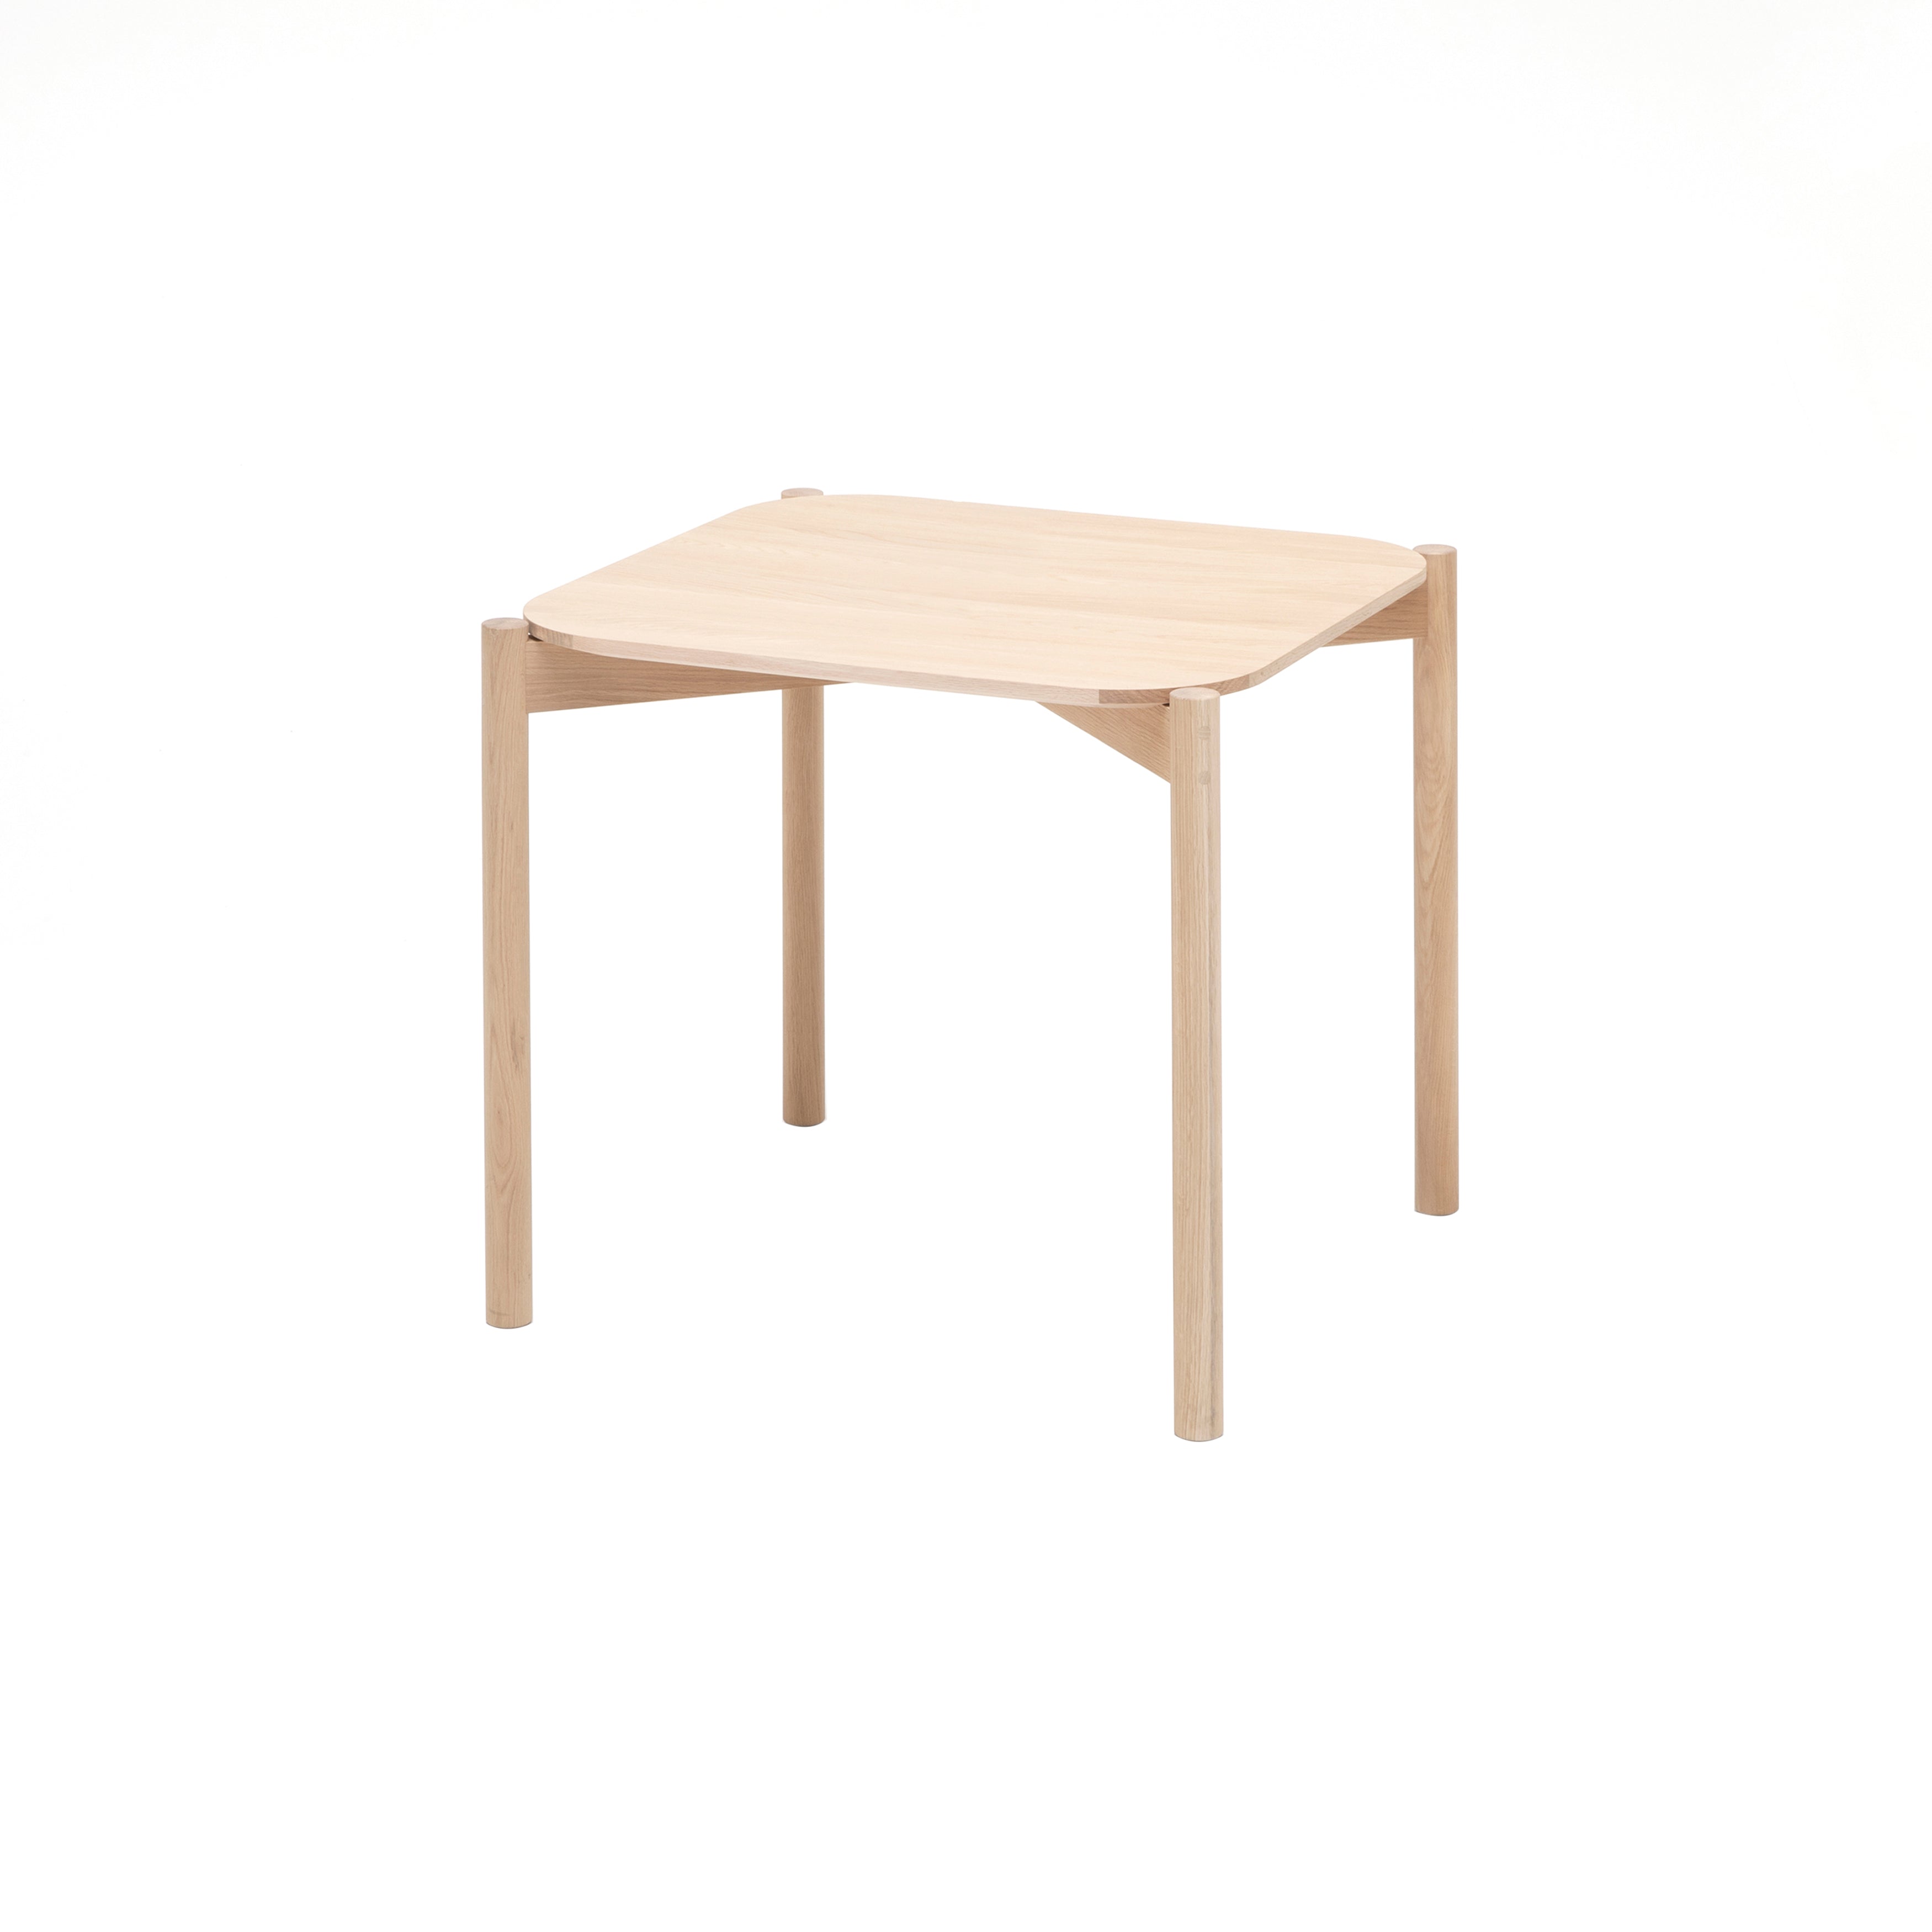 Castor Dining Table: Small - 29.5